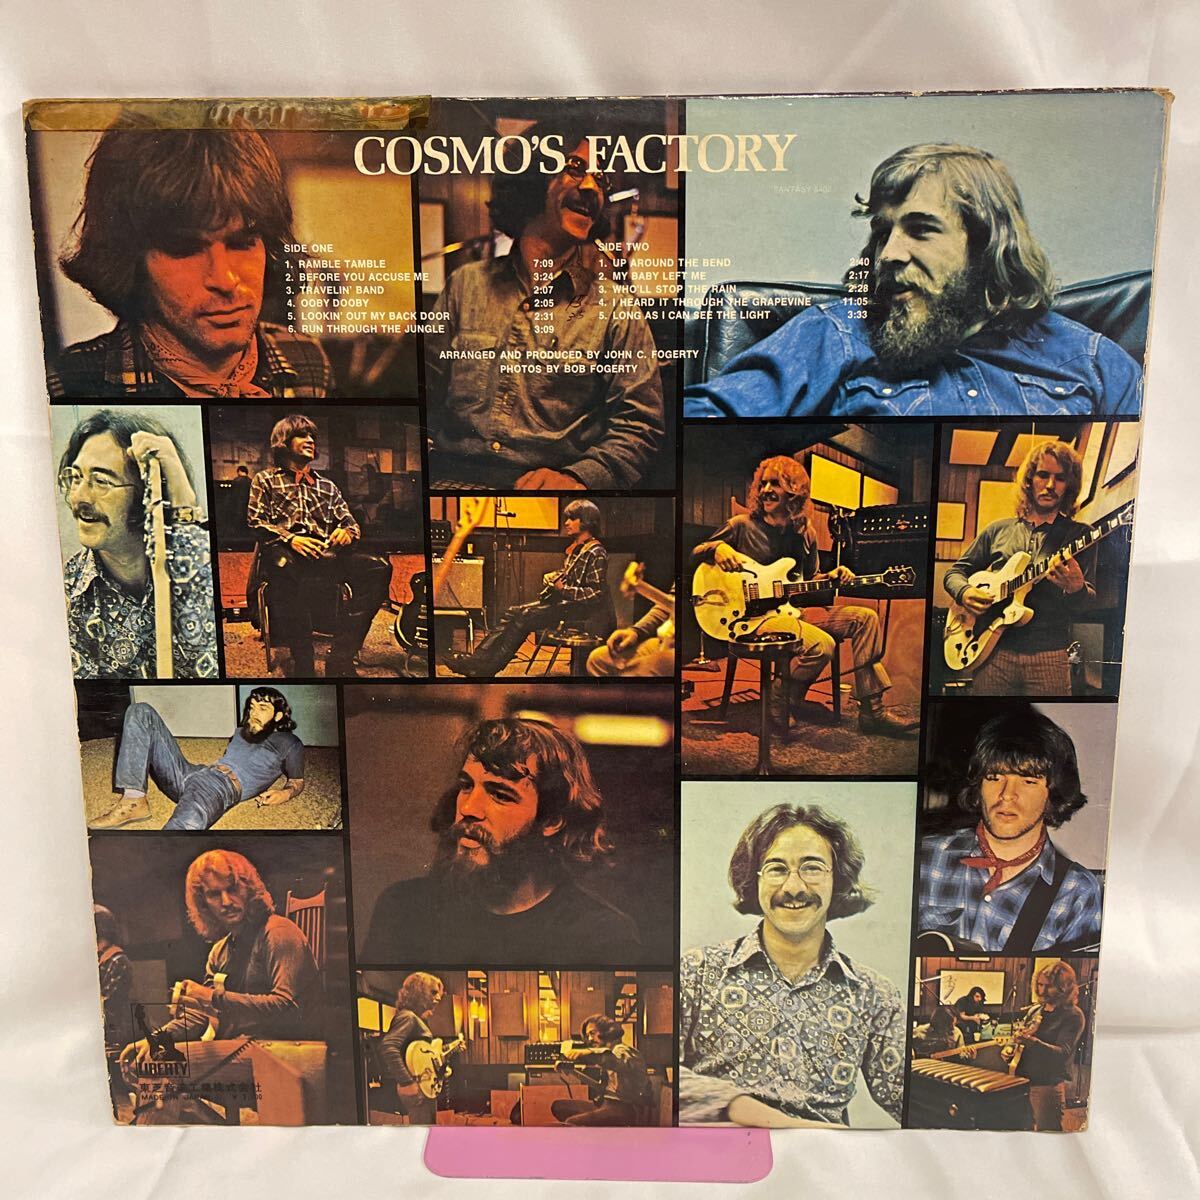 40511N 12inch LP★C.C.R. CREEDENCE CLEARWATER REVIVAL /コスモズ・ファクトリー COSMO'S FACTORY ★LP-80054_画像2